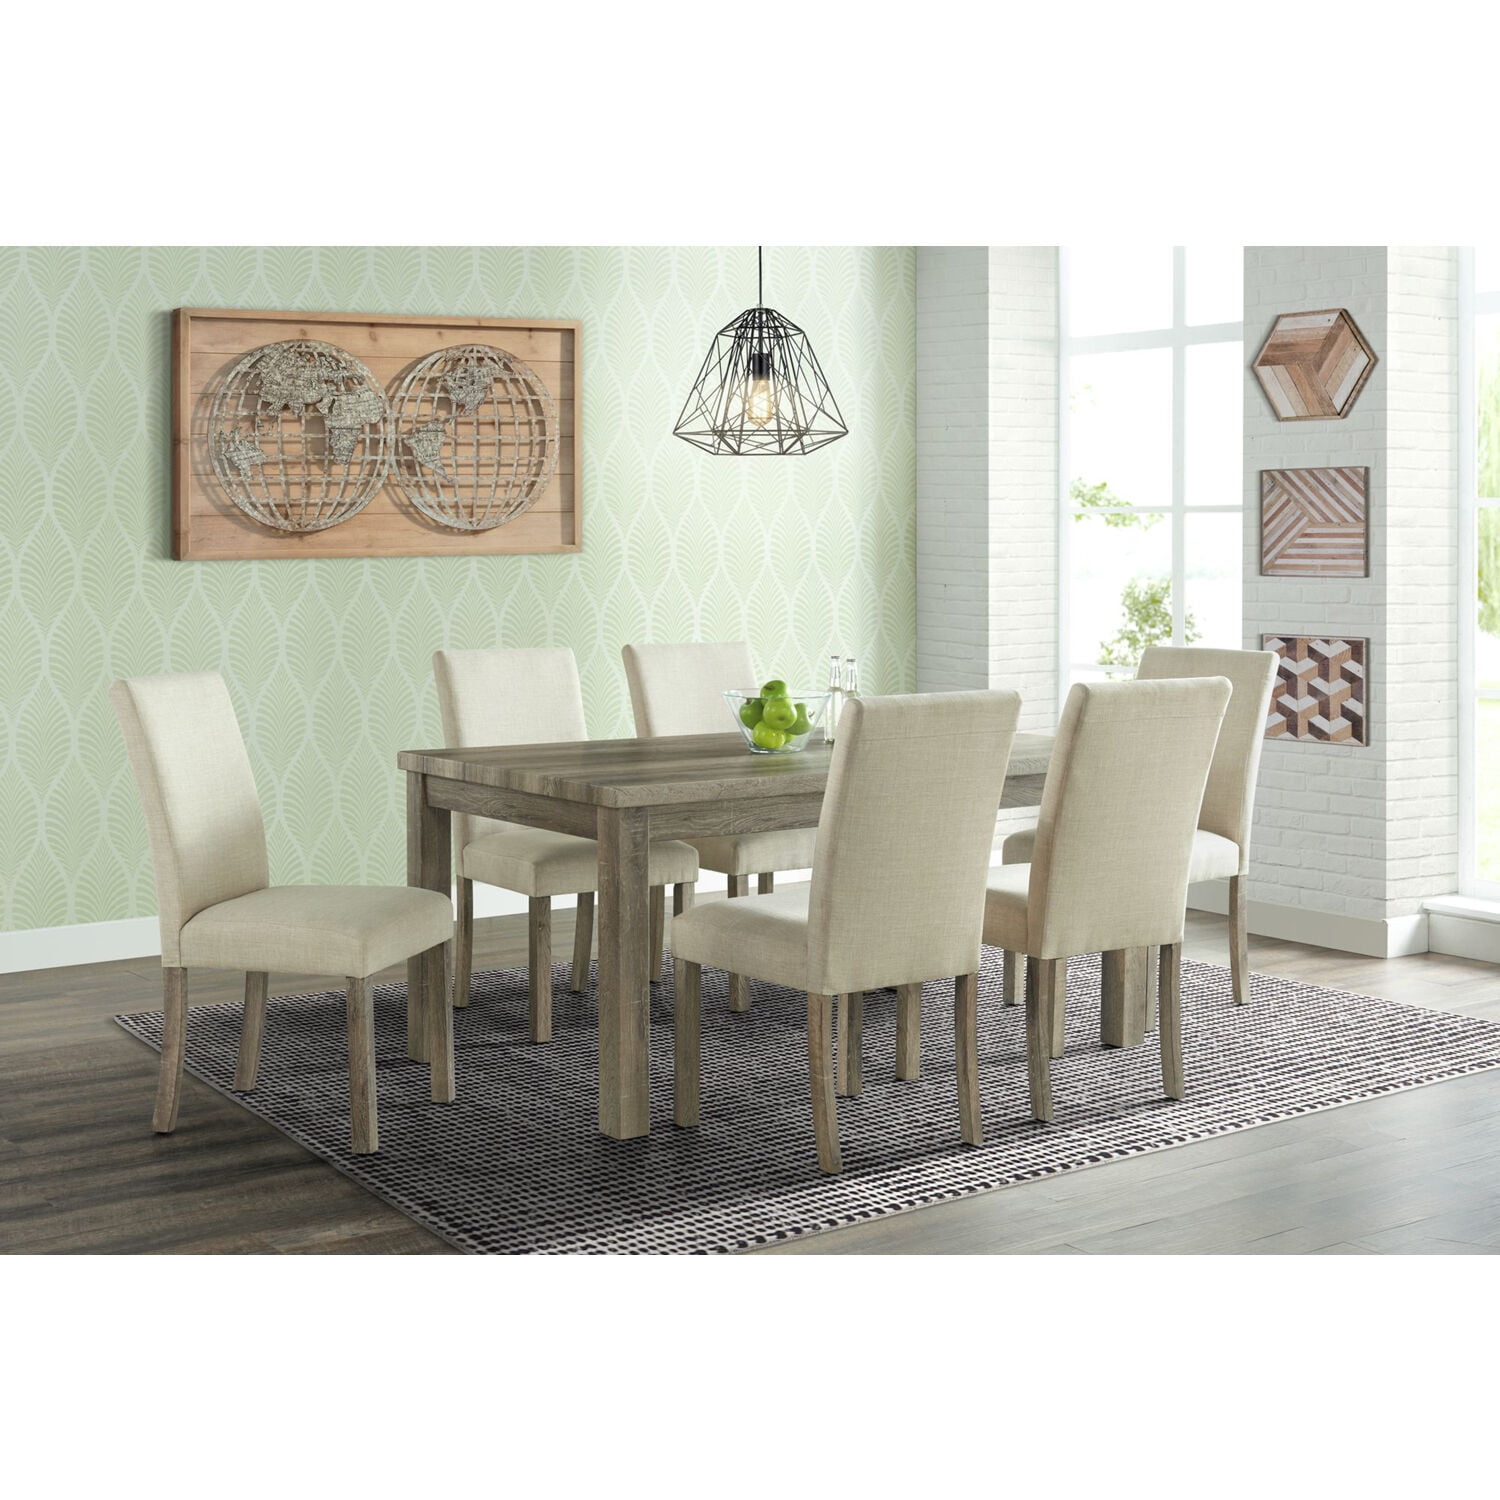 Cmf 982003-7pc-rus Wyeth Dining Set With Table & 6 Fabric Side Chairs - 7 Piece